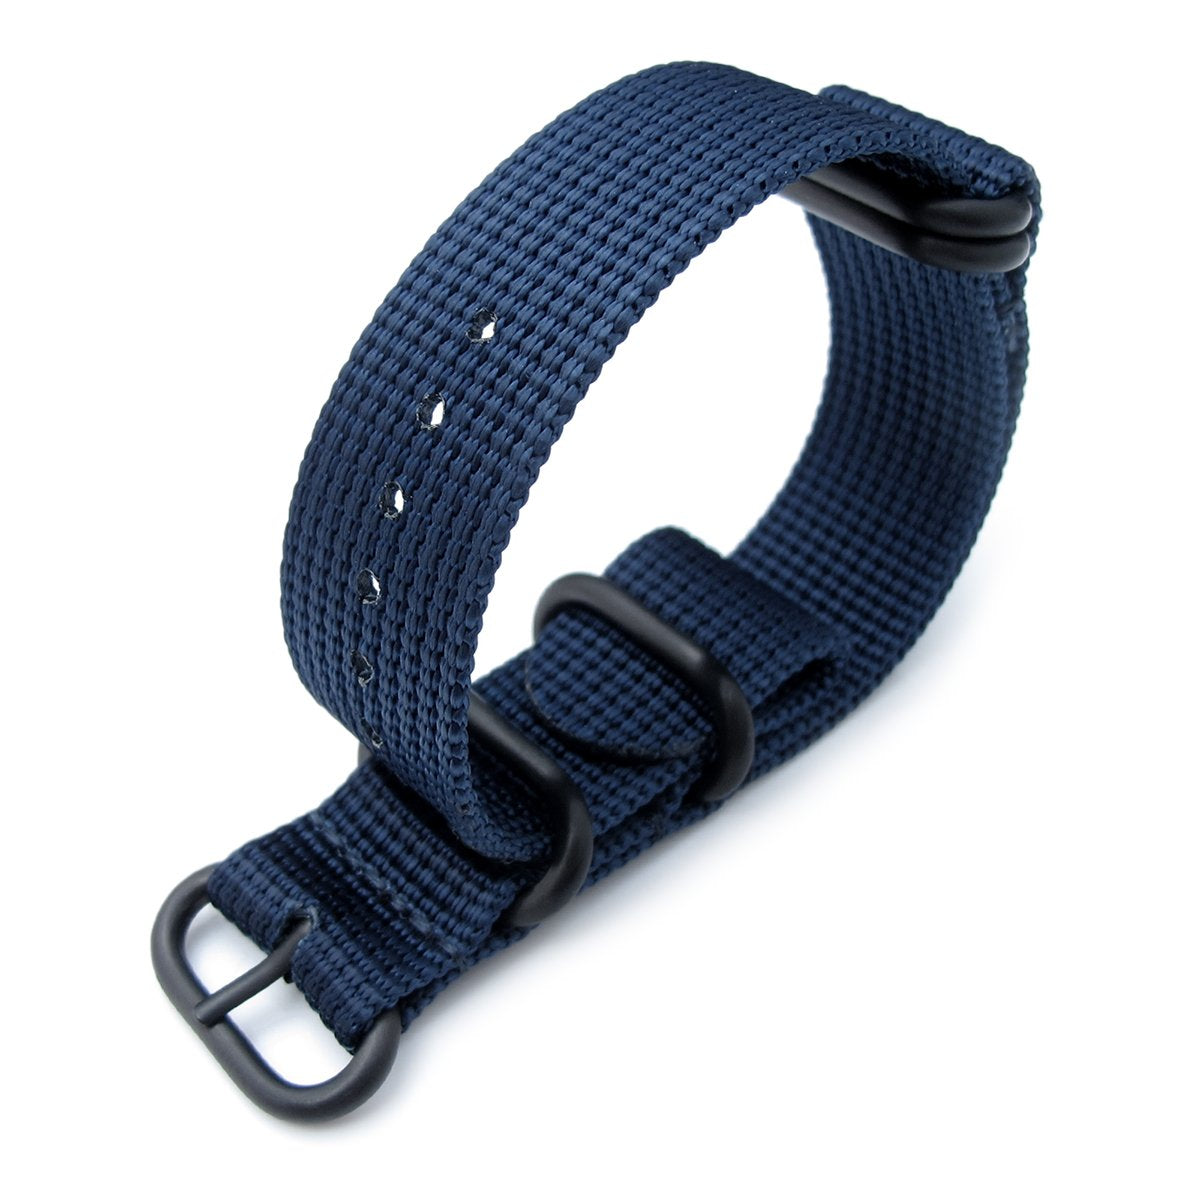 MiLTAT 20mm or 22mm 5 Rings G10 Zulu Water Repellent 3D Nylon Navy Blue PVD Black Strapcode Watch Bands